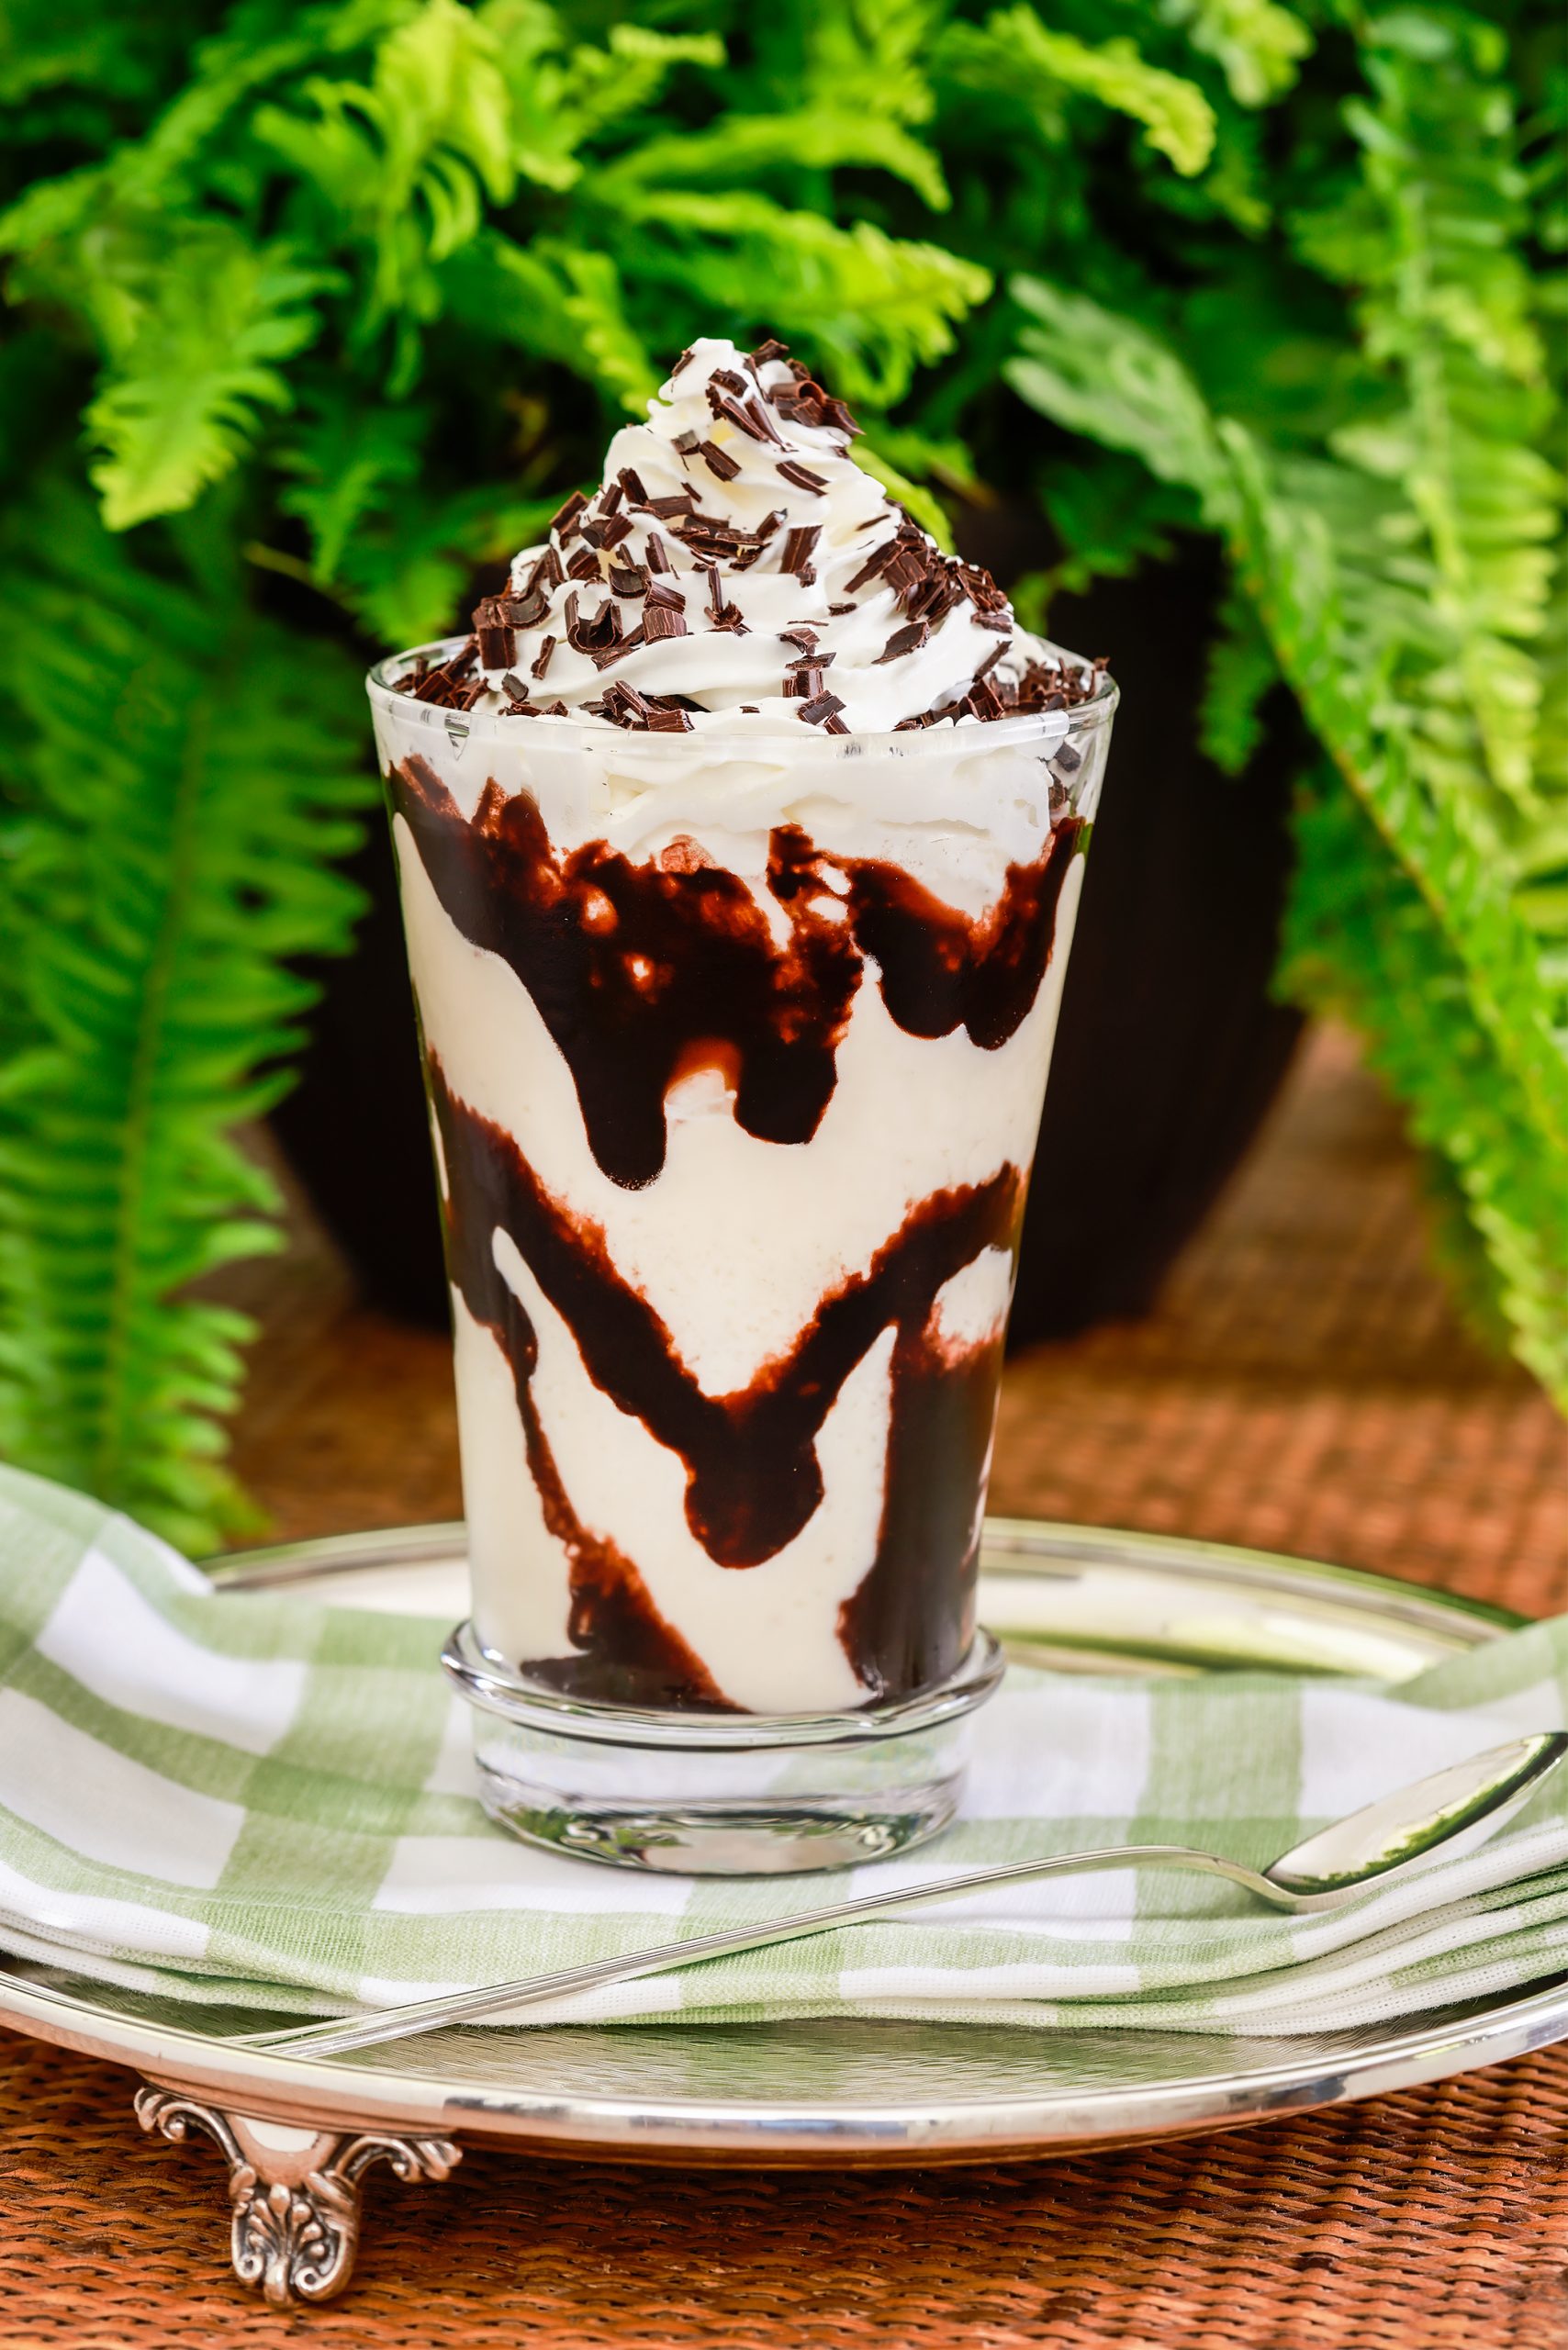 The Congaree River Mudslide with coffee liqueur, vanilla ice cream, and chocolate syrup and shavings is a decadent and delightful dessert. Juliska large tumbler courtesy of Cottage & Vine and Tableau linens courtesy of Kudzu Bakery & Market.
